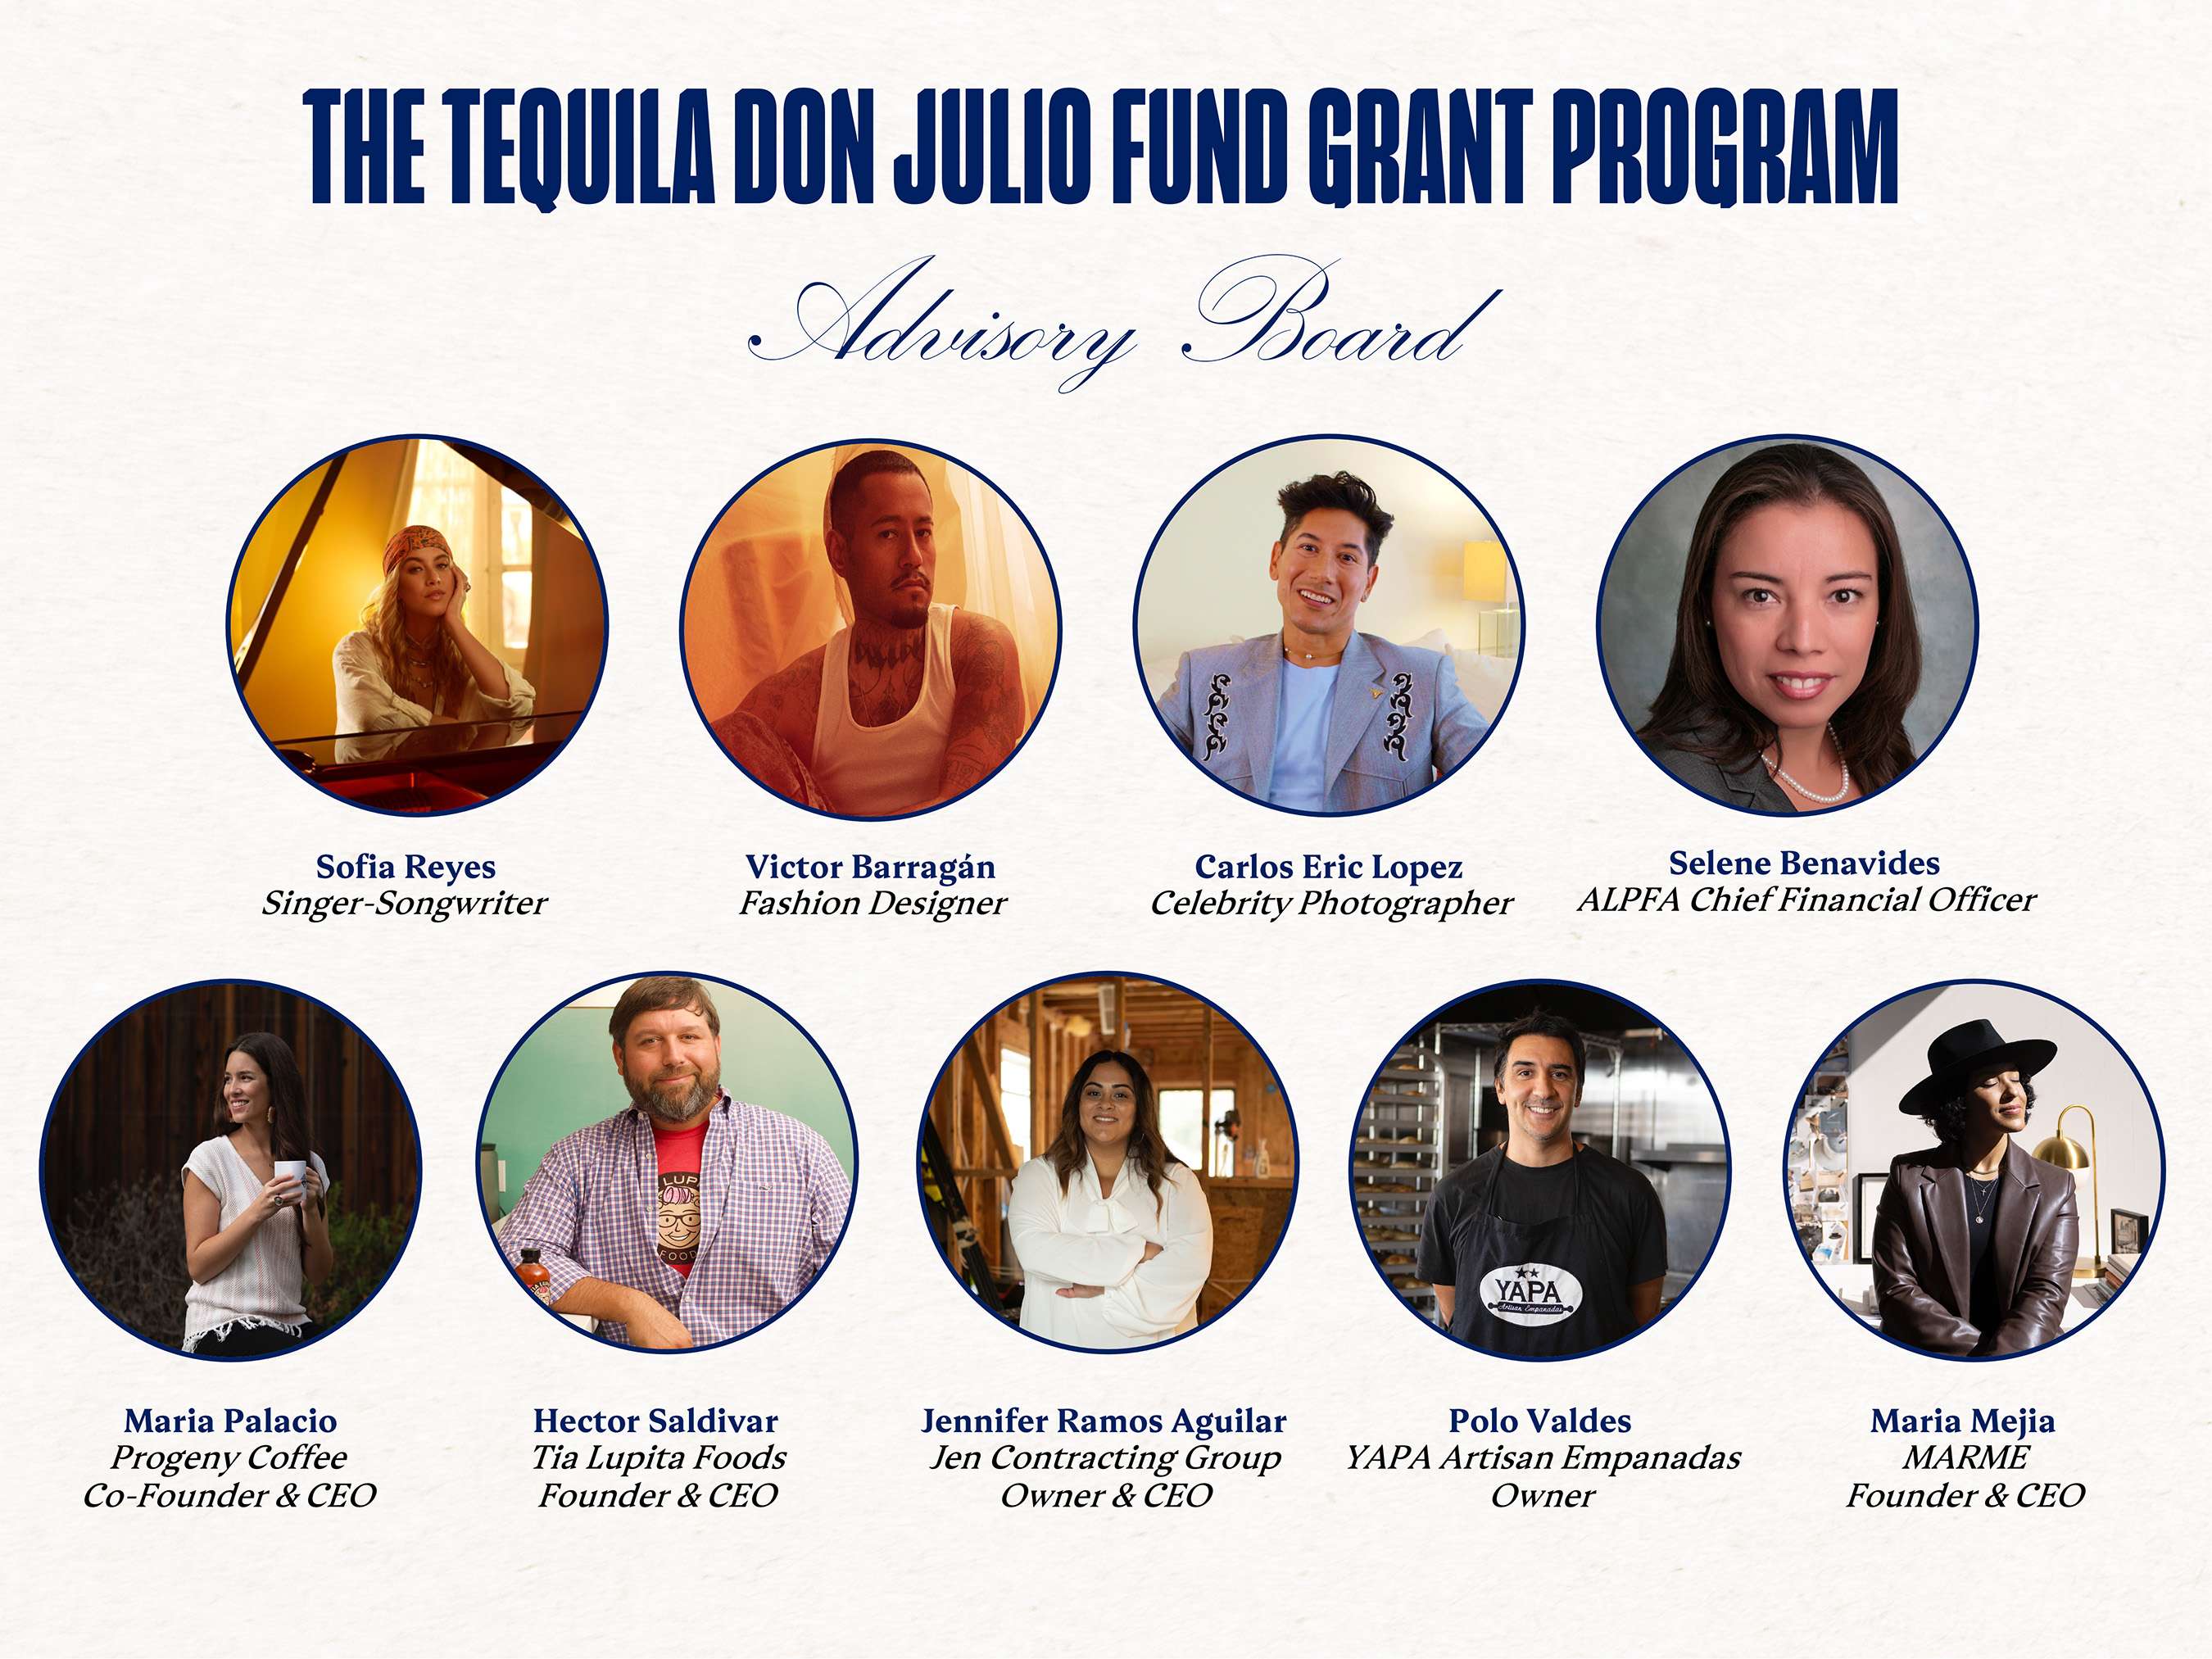 Introducing the newly appointed Tequila Don Julio Fund Grant Program Advisory Board!